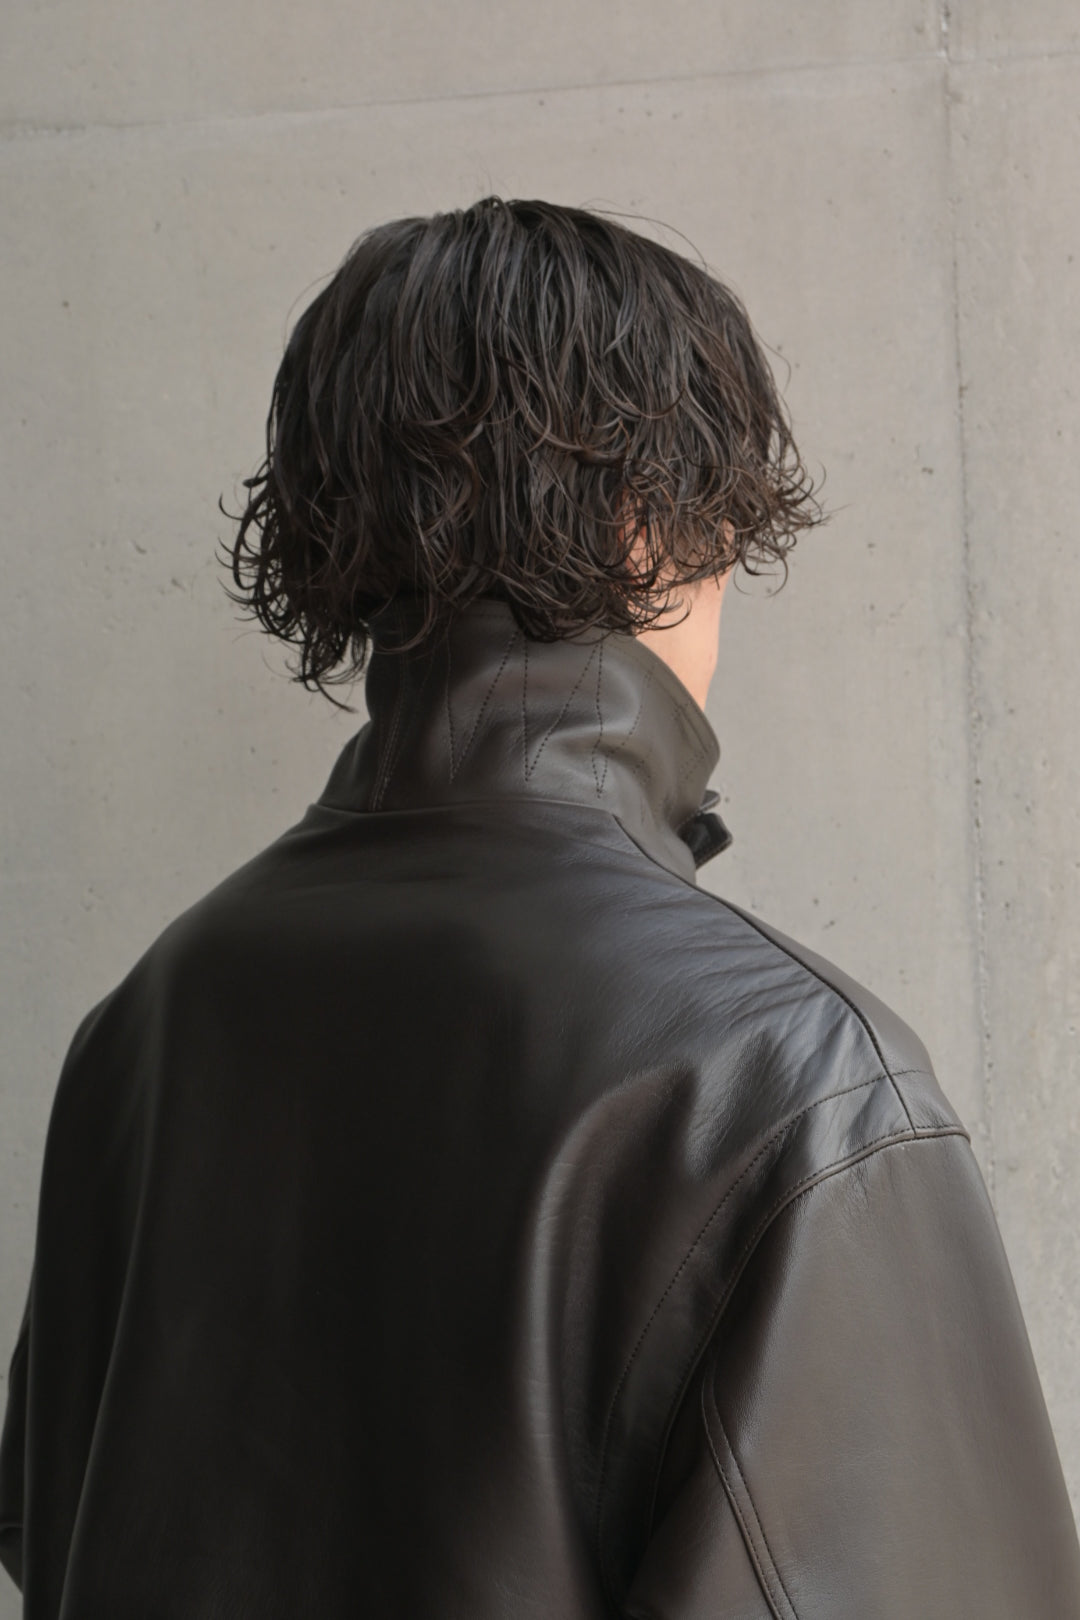 Leather Coat BROWN